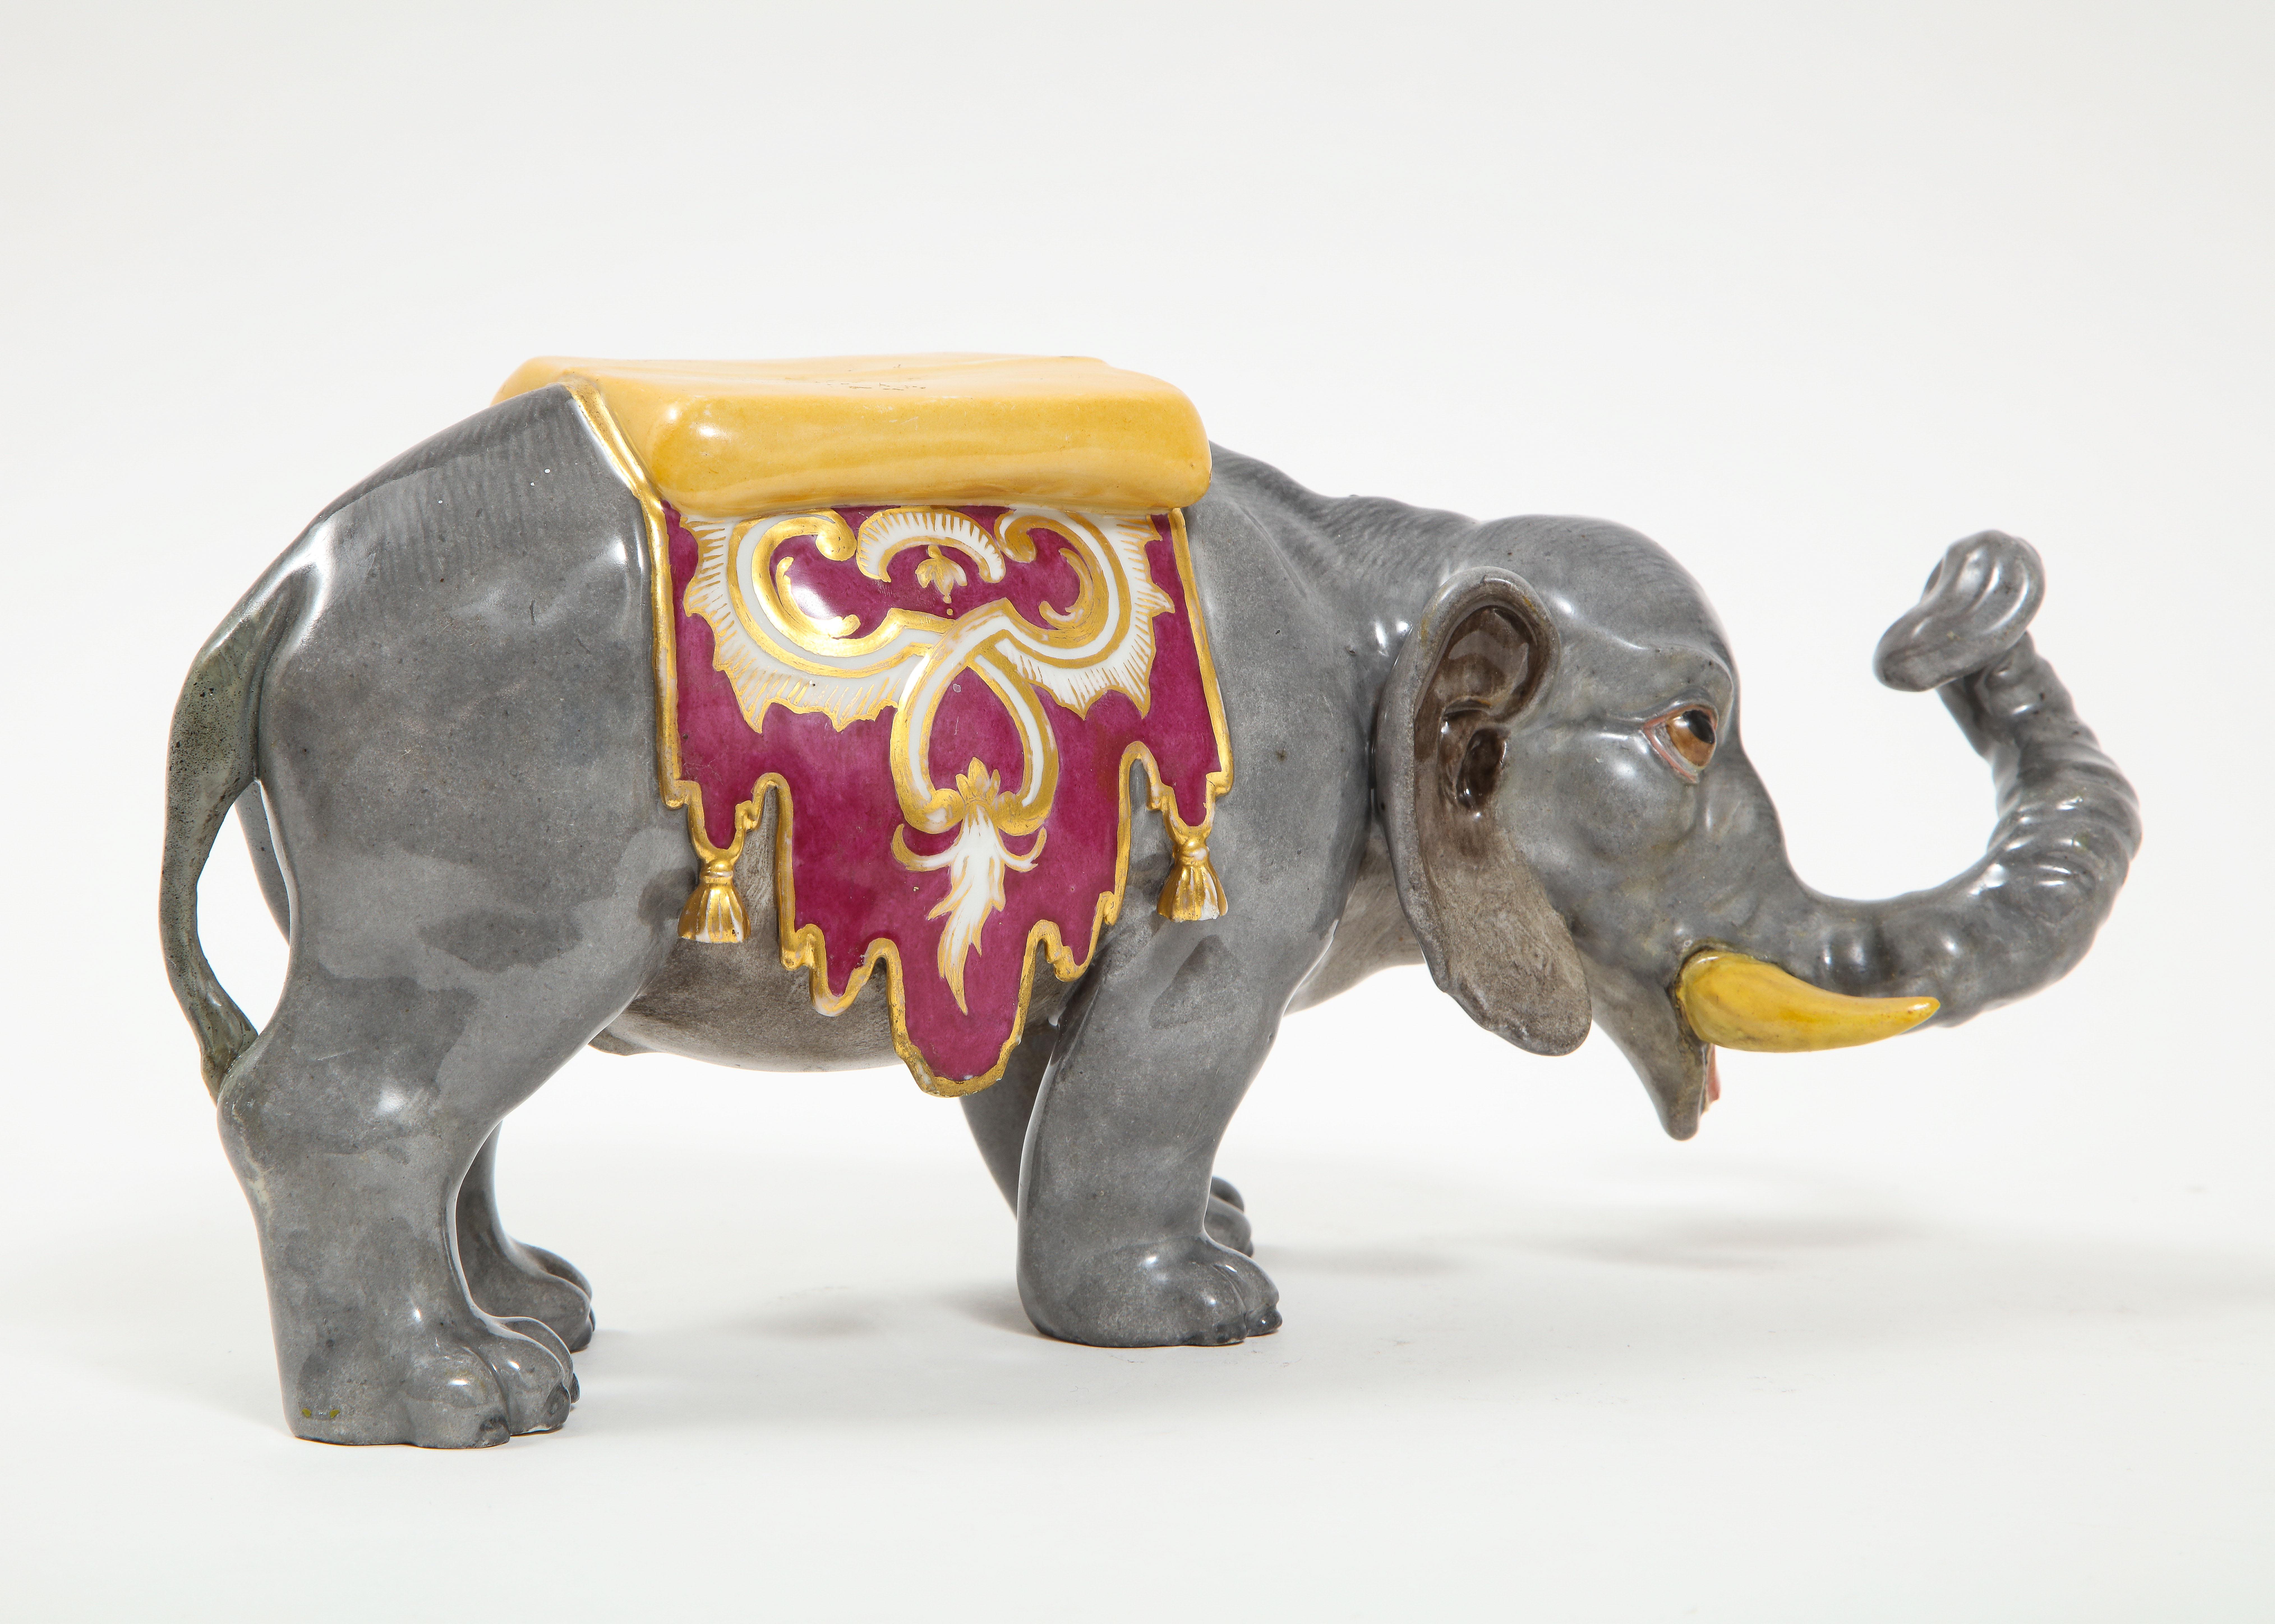 German Fine Hand-Painted Meissen Porcelain Model of an Indian Elephant with a Saddle For Sale